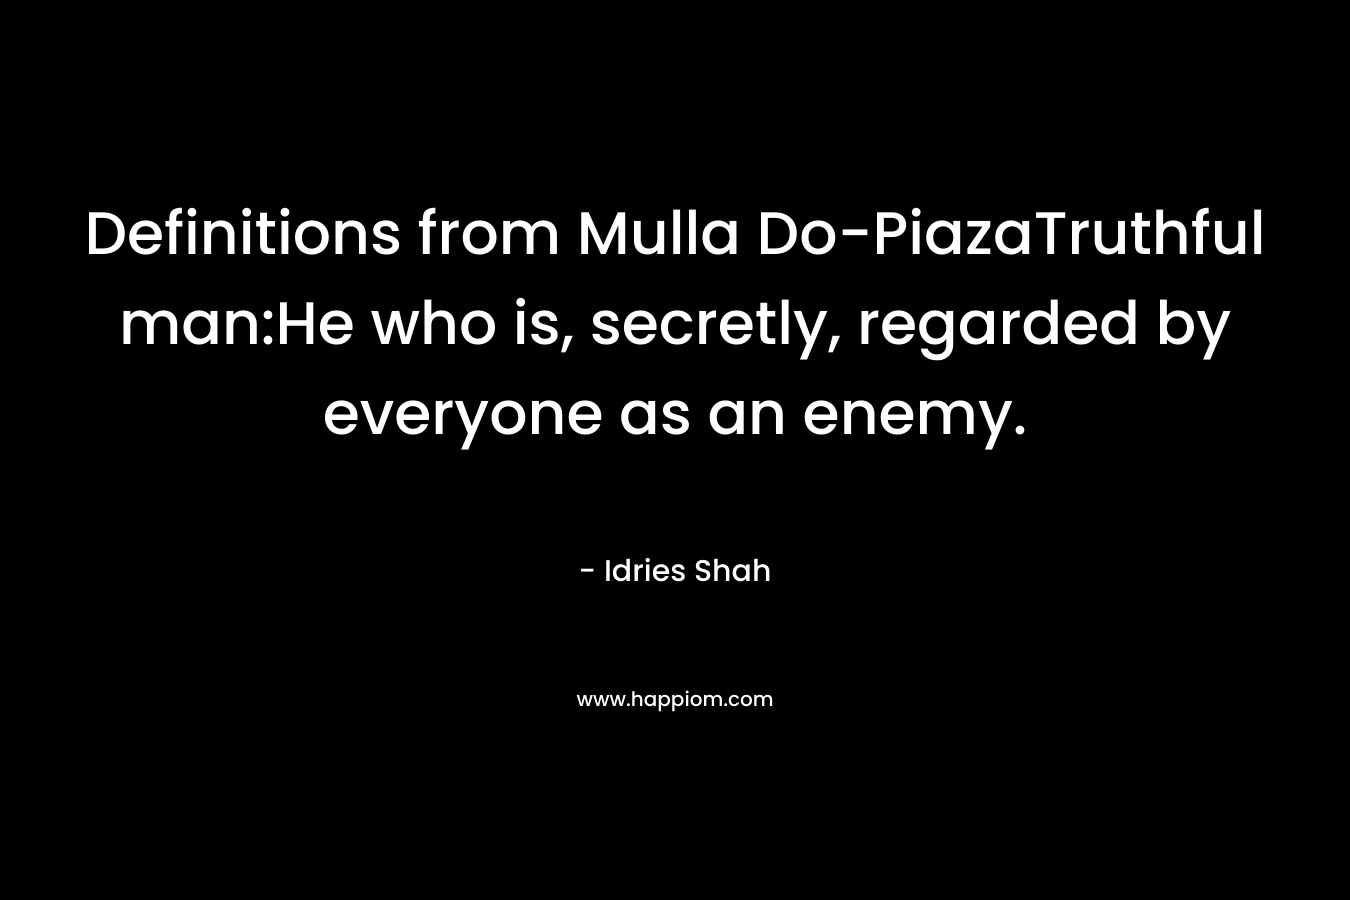 Definitions from Mulla Do-PiazaTruthful man:He who is, secretly, regarded by everyone as an enemy. – Idries Shah